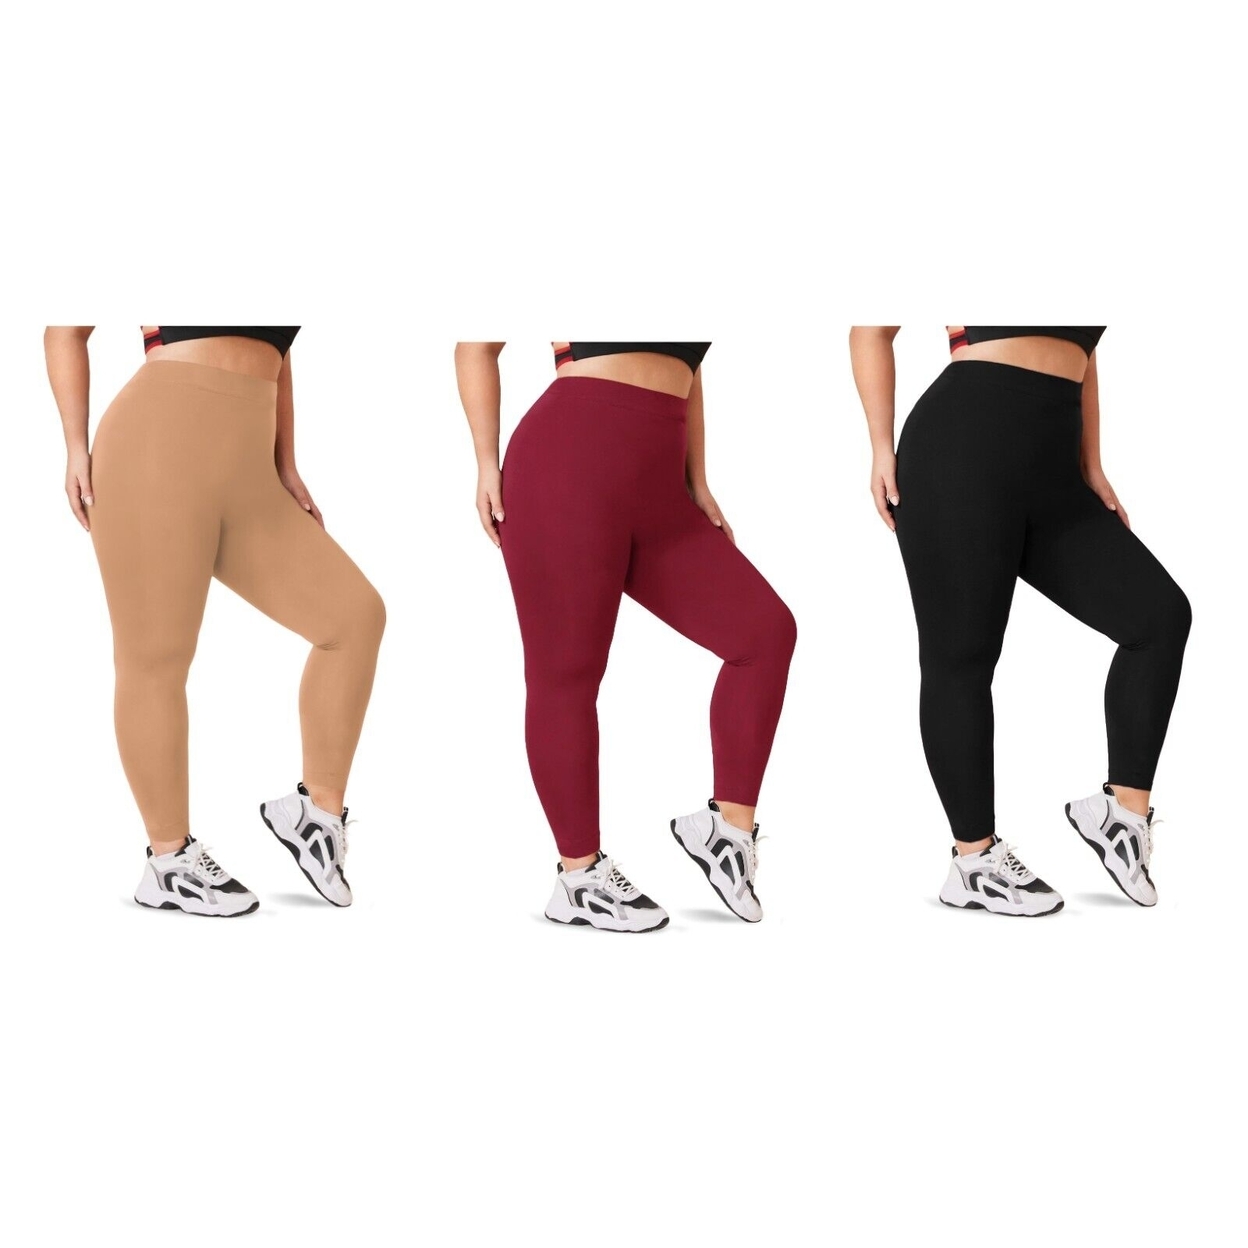 2-Pack: Women's Casual Ultra-Soft Smooth High Waisted Athletic Active Yoga Leggings Plus Size Available - Red & Black, 1x